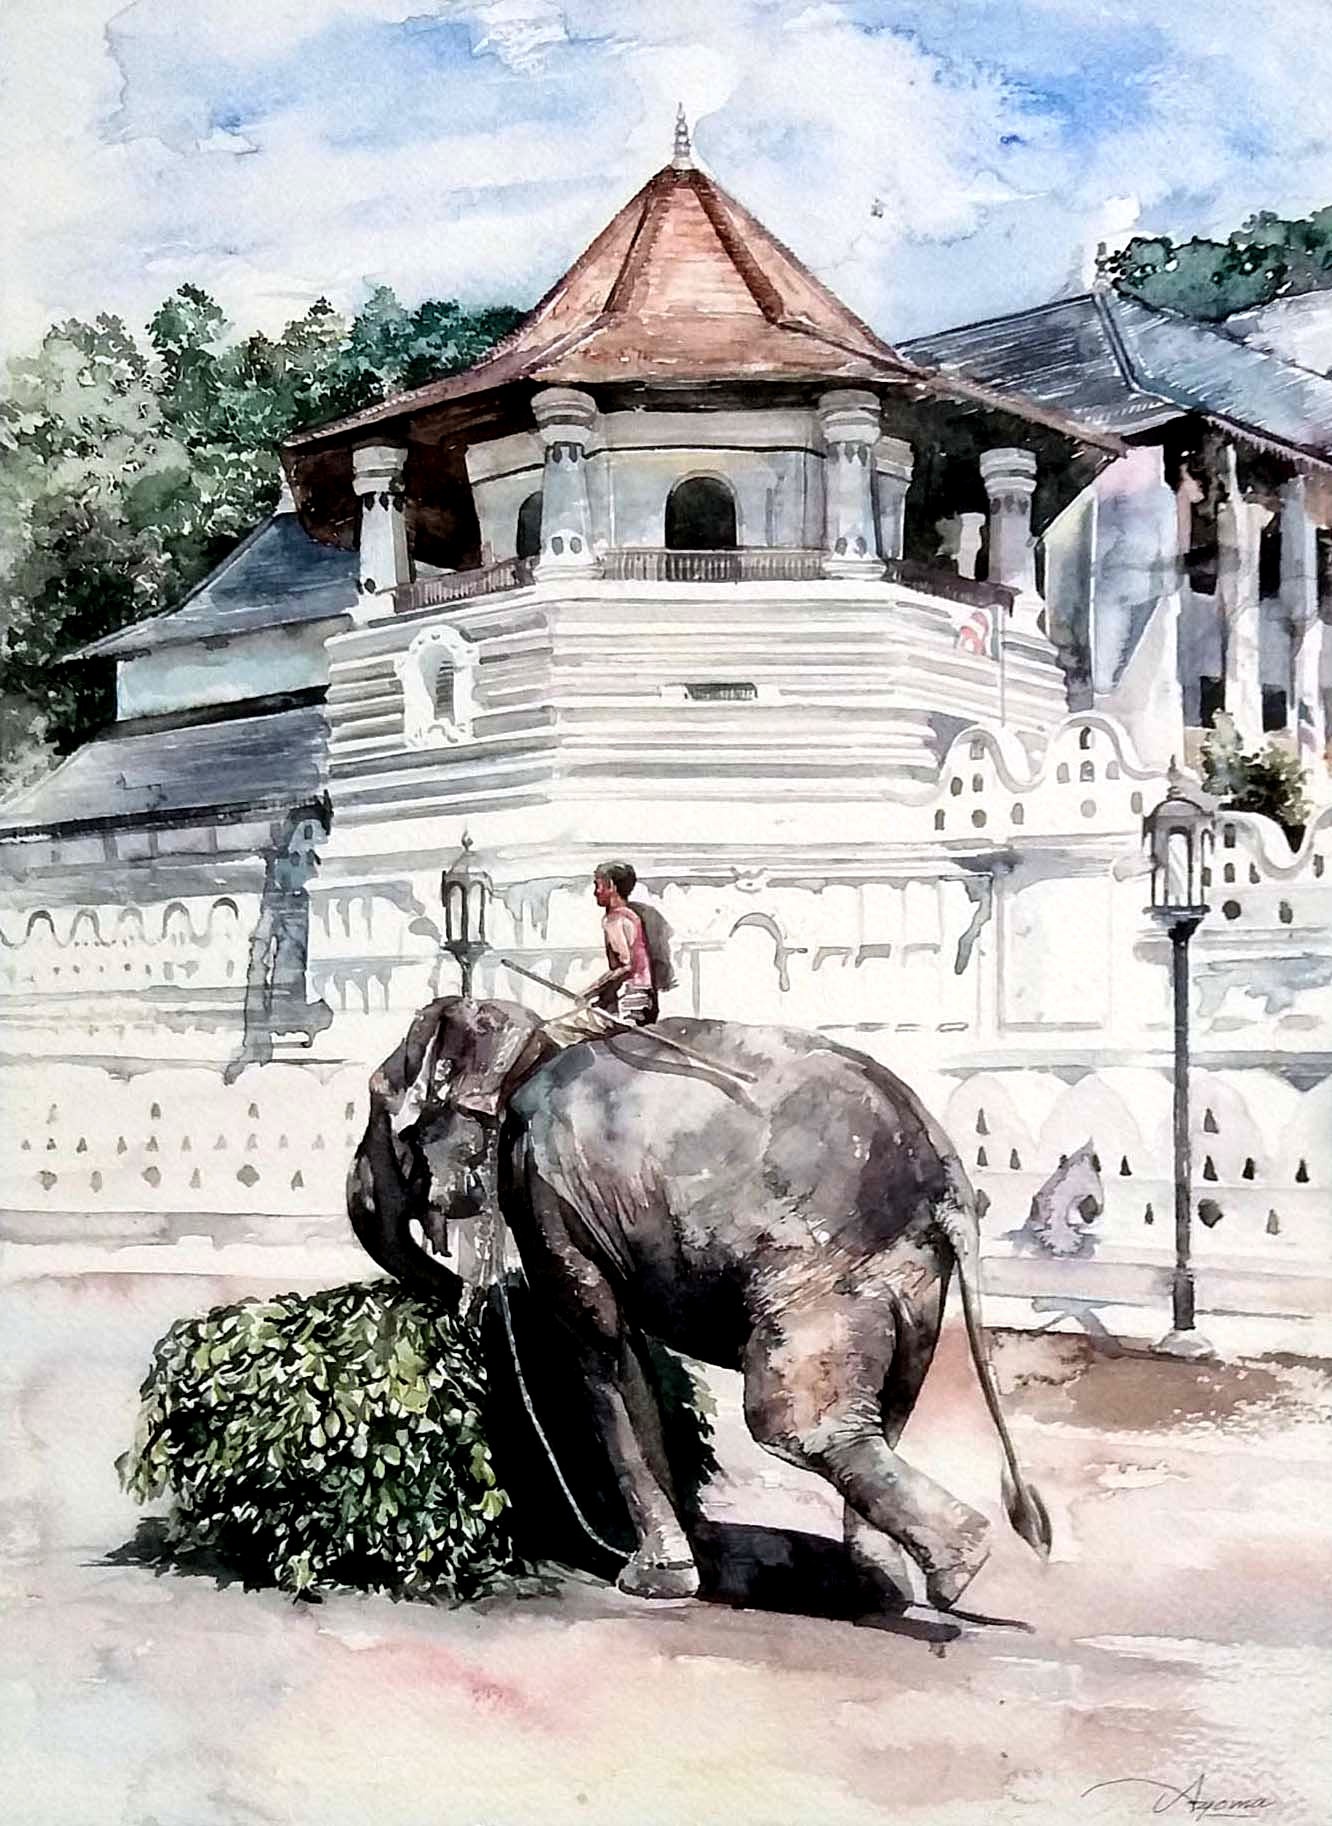 Kandy Palace of the Tooth by Ayoma Wijerathne